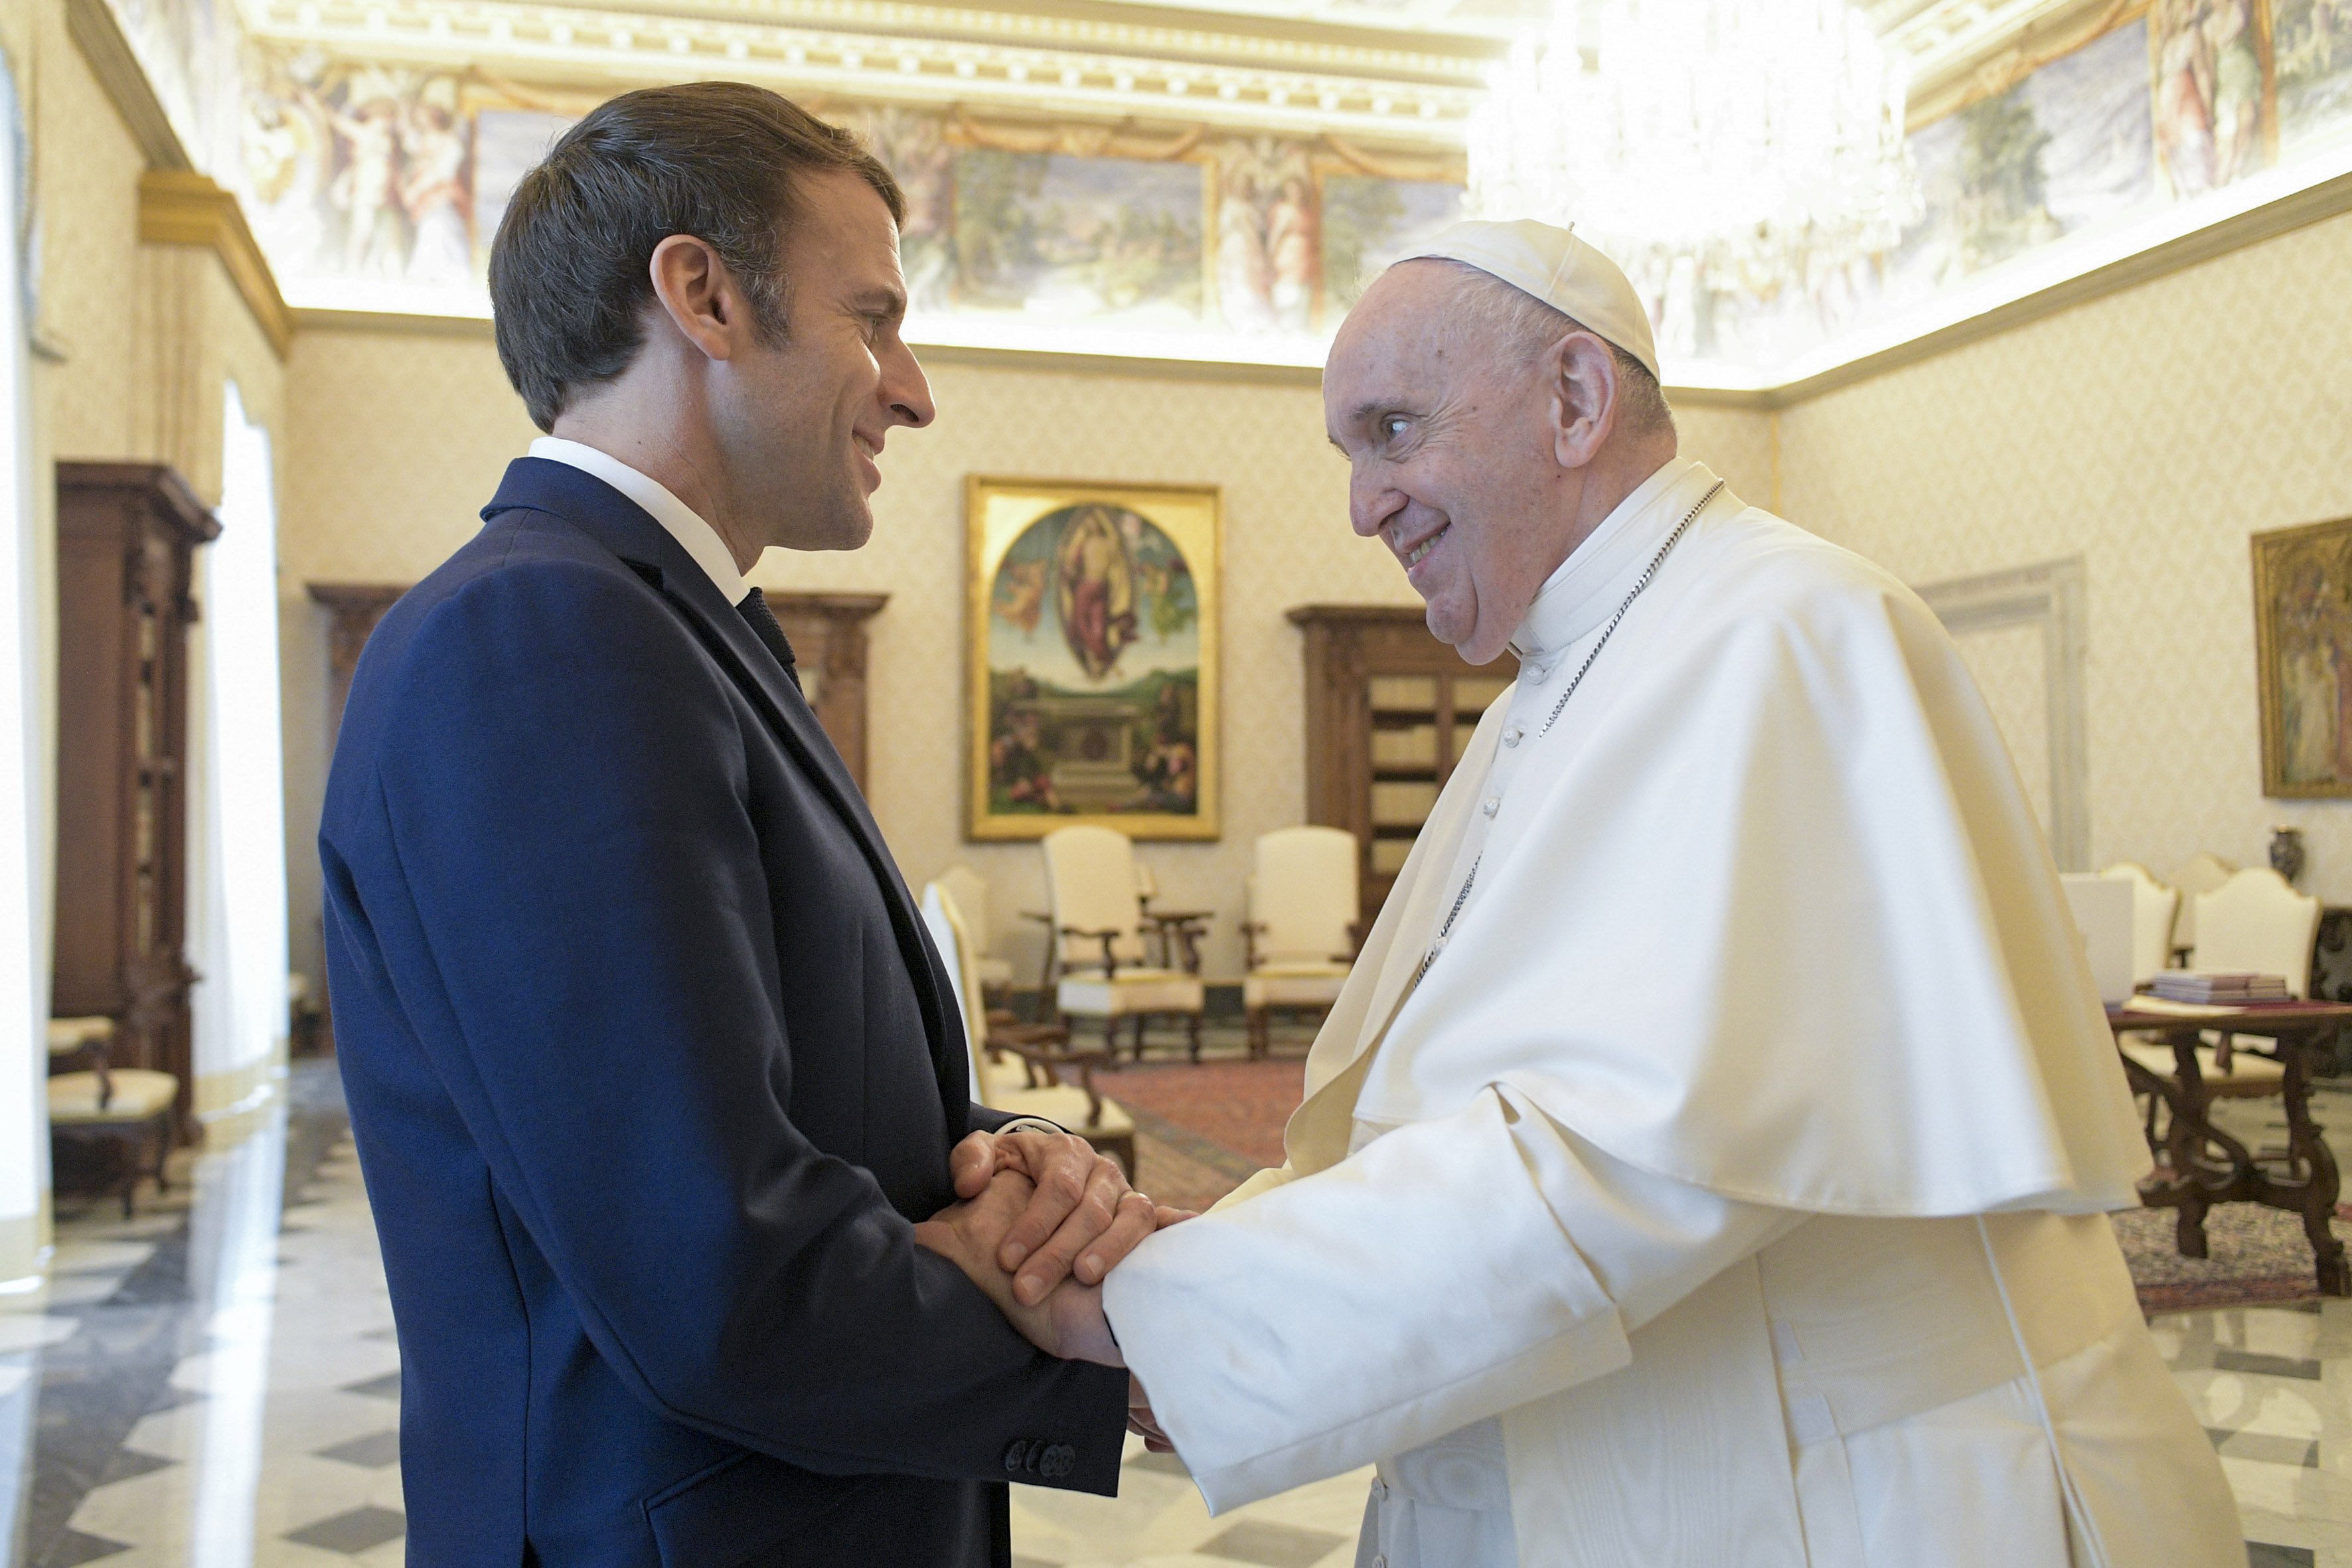 Pope Francis shakes hands with French President Emmanuel Macron during an audience at the Vatican Nov. 26, 2021. (CNS photo/Vatican Media)